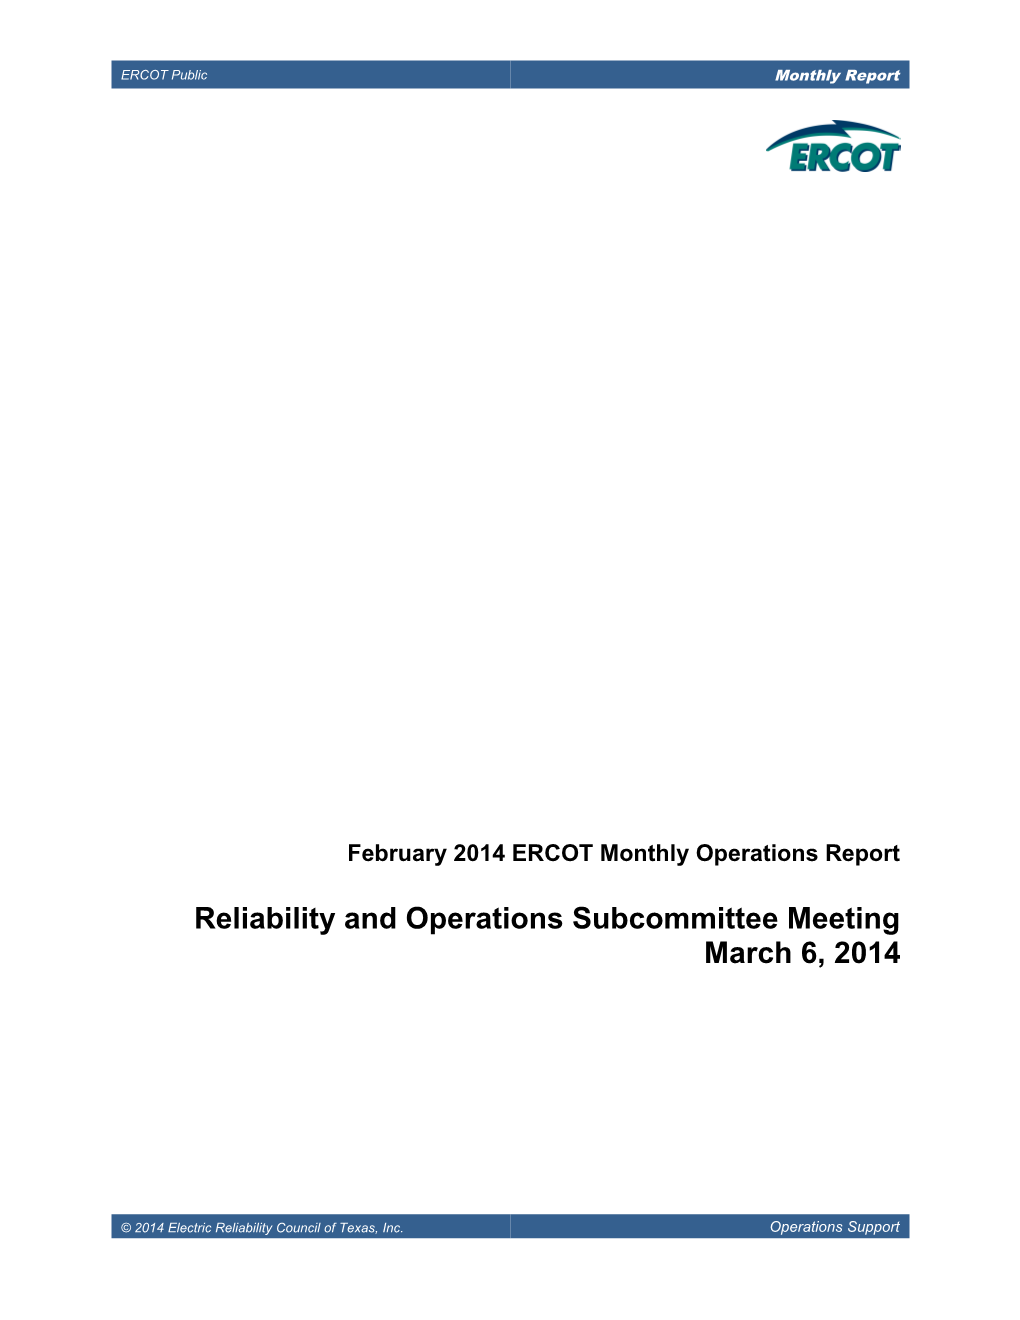 Reliability and Operations Subcommittee Meeting s1